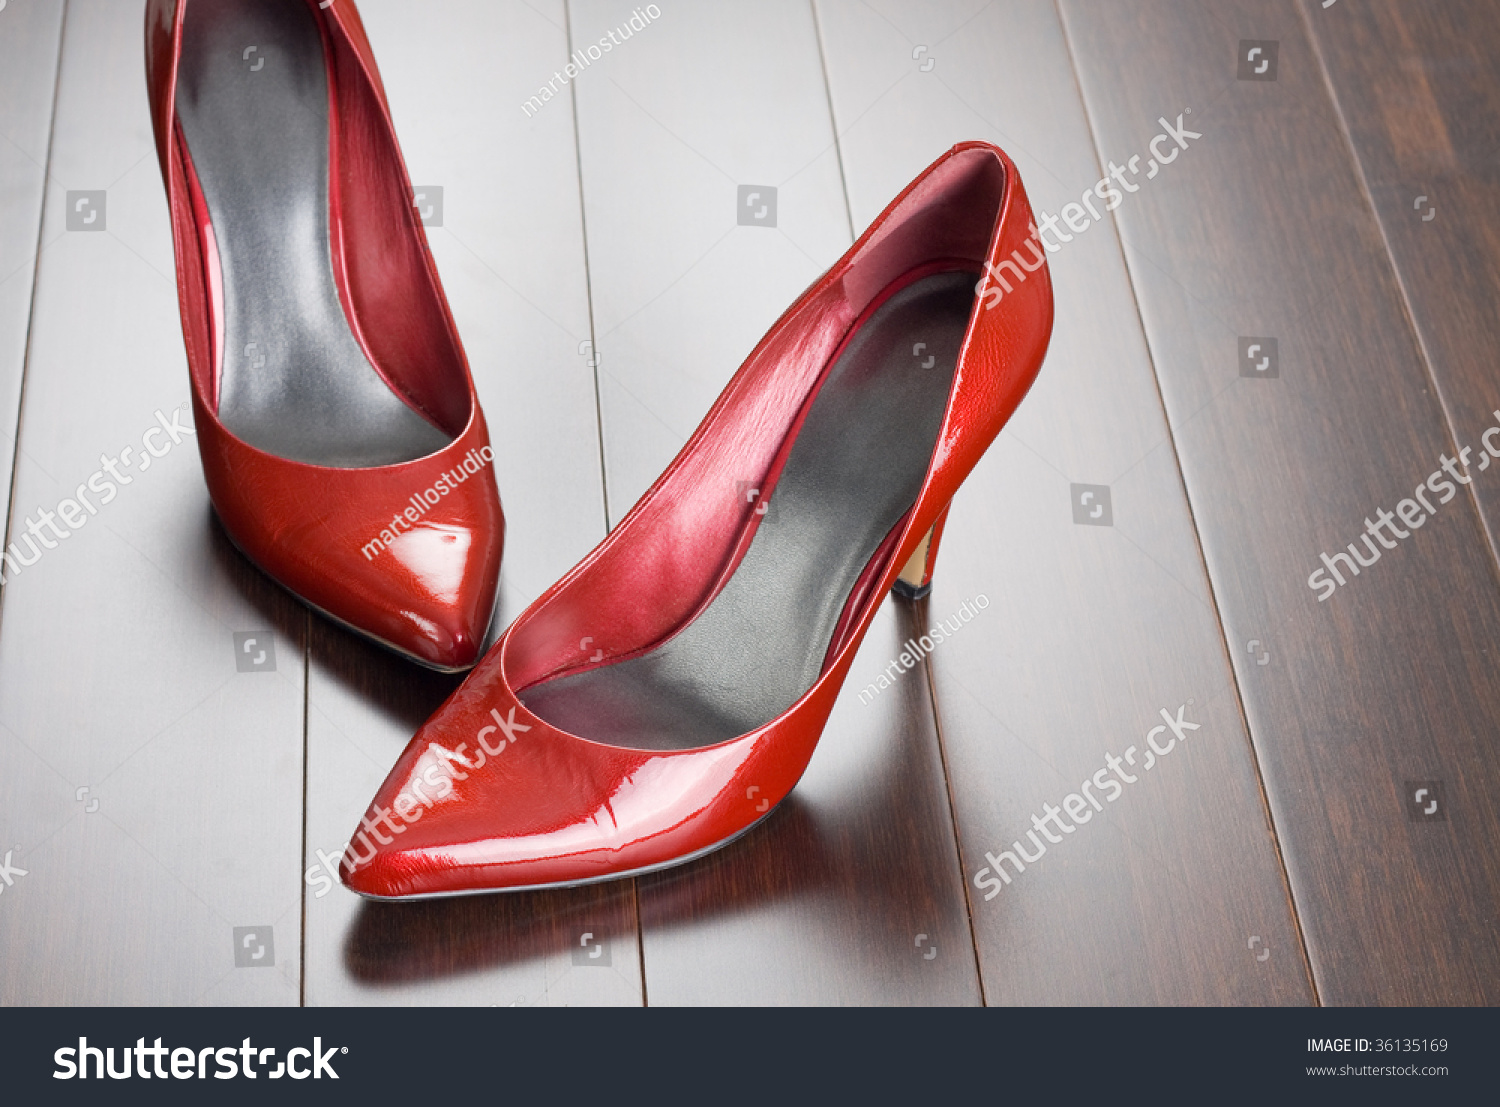 Sexy Red Shoes On Bamboo Dance Floor Stock Photo 36135169 : Shutterstock